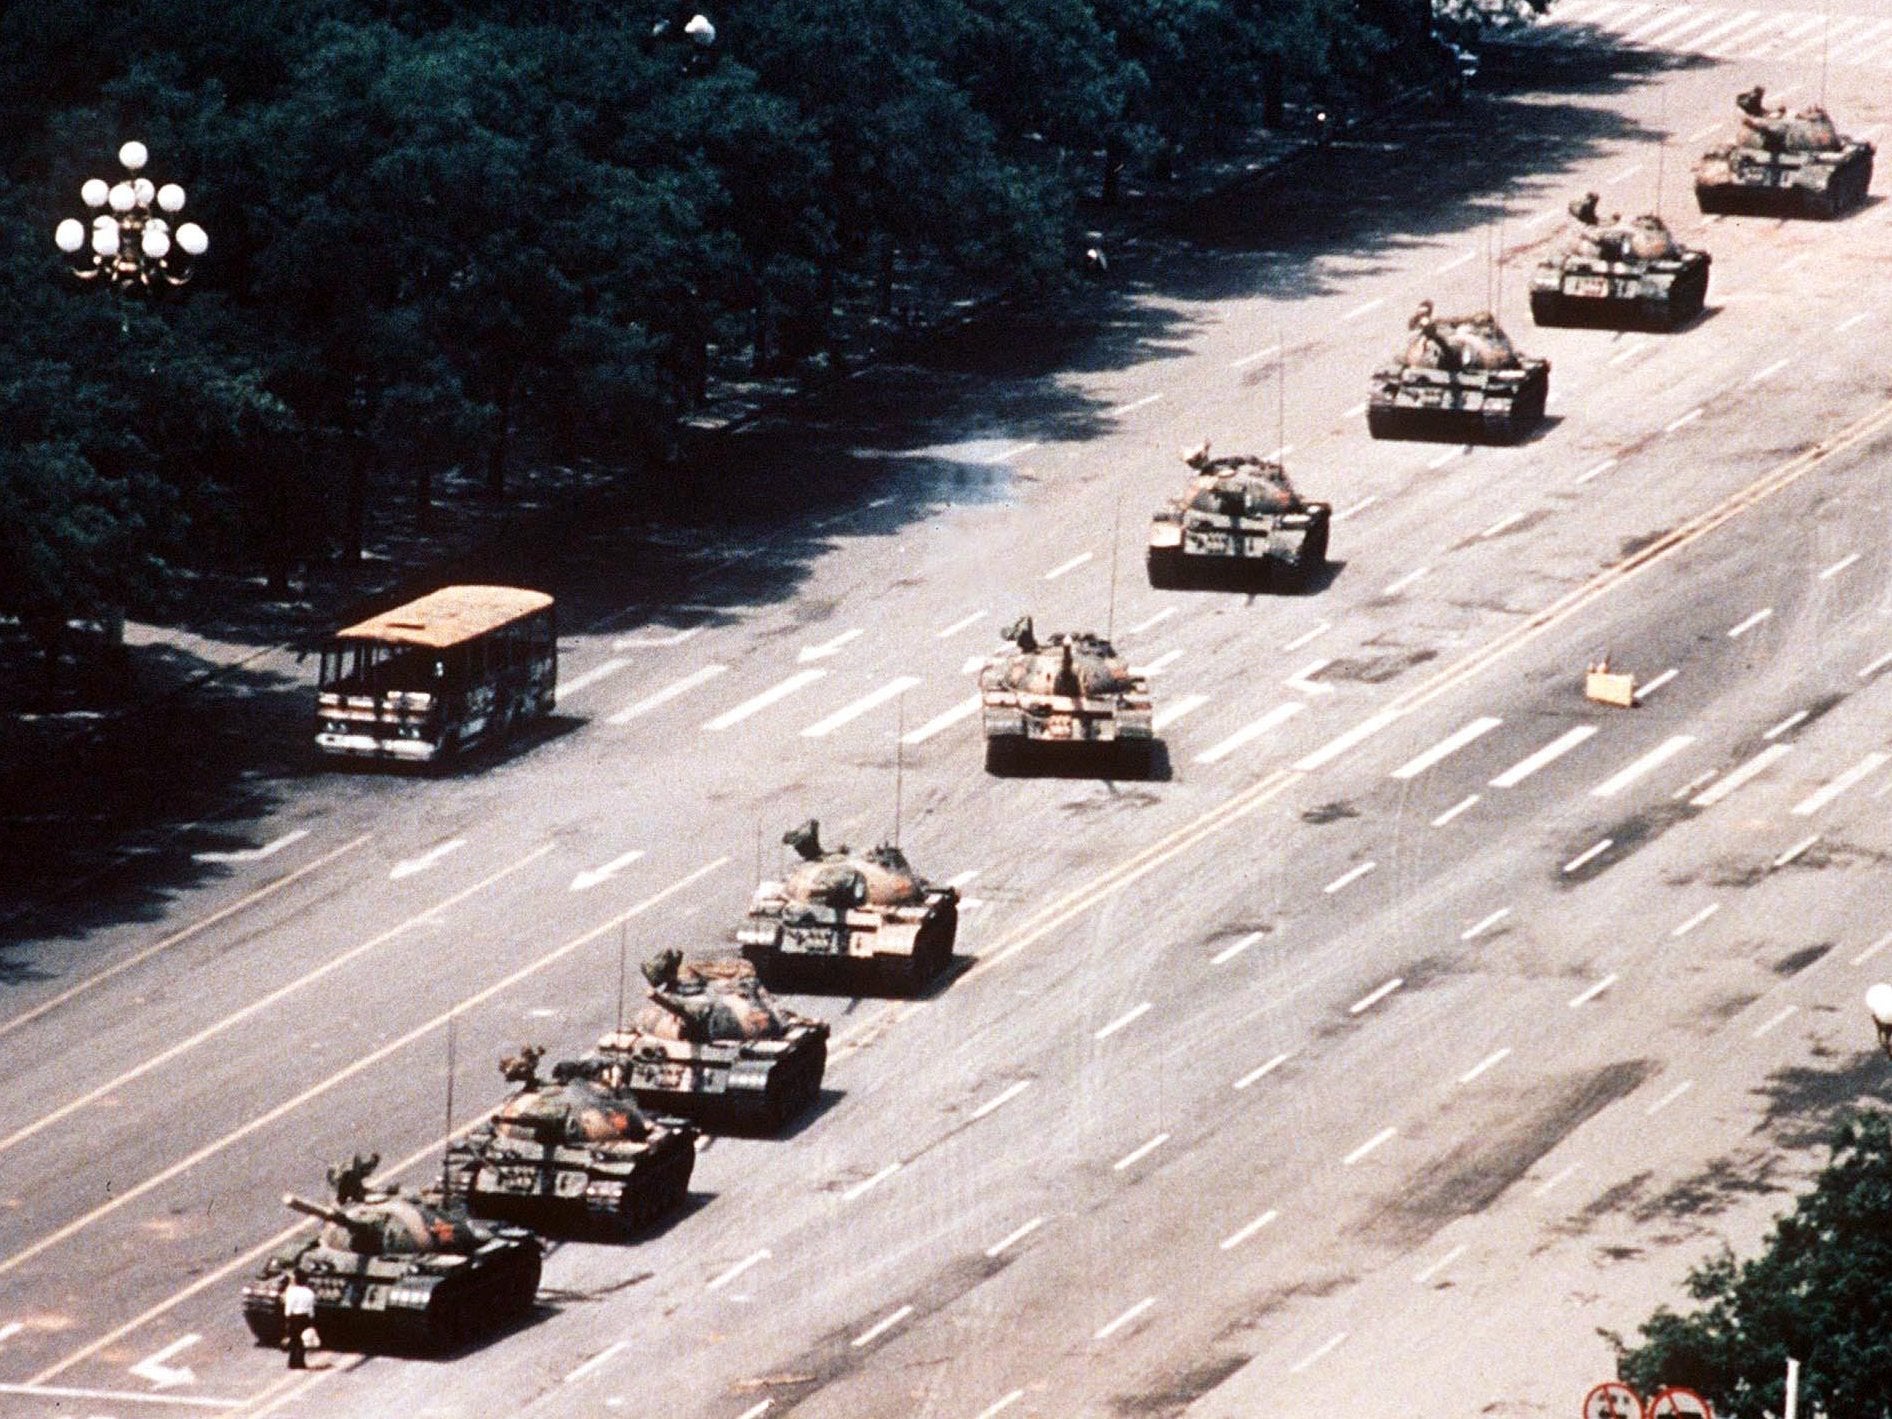 Wang Weilin defies the tanks as they roll into Tianamen square in June 1989. Thousands of students in Beijing took to the streets in a pro-democracy demonstration